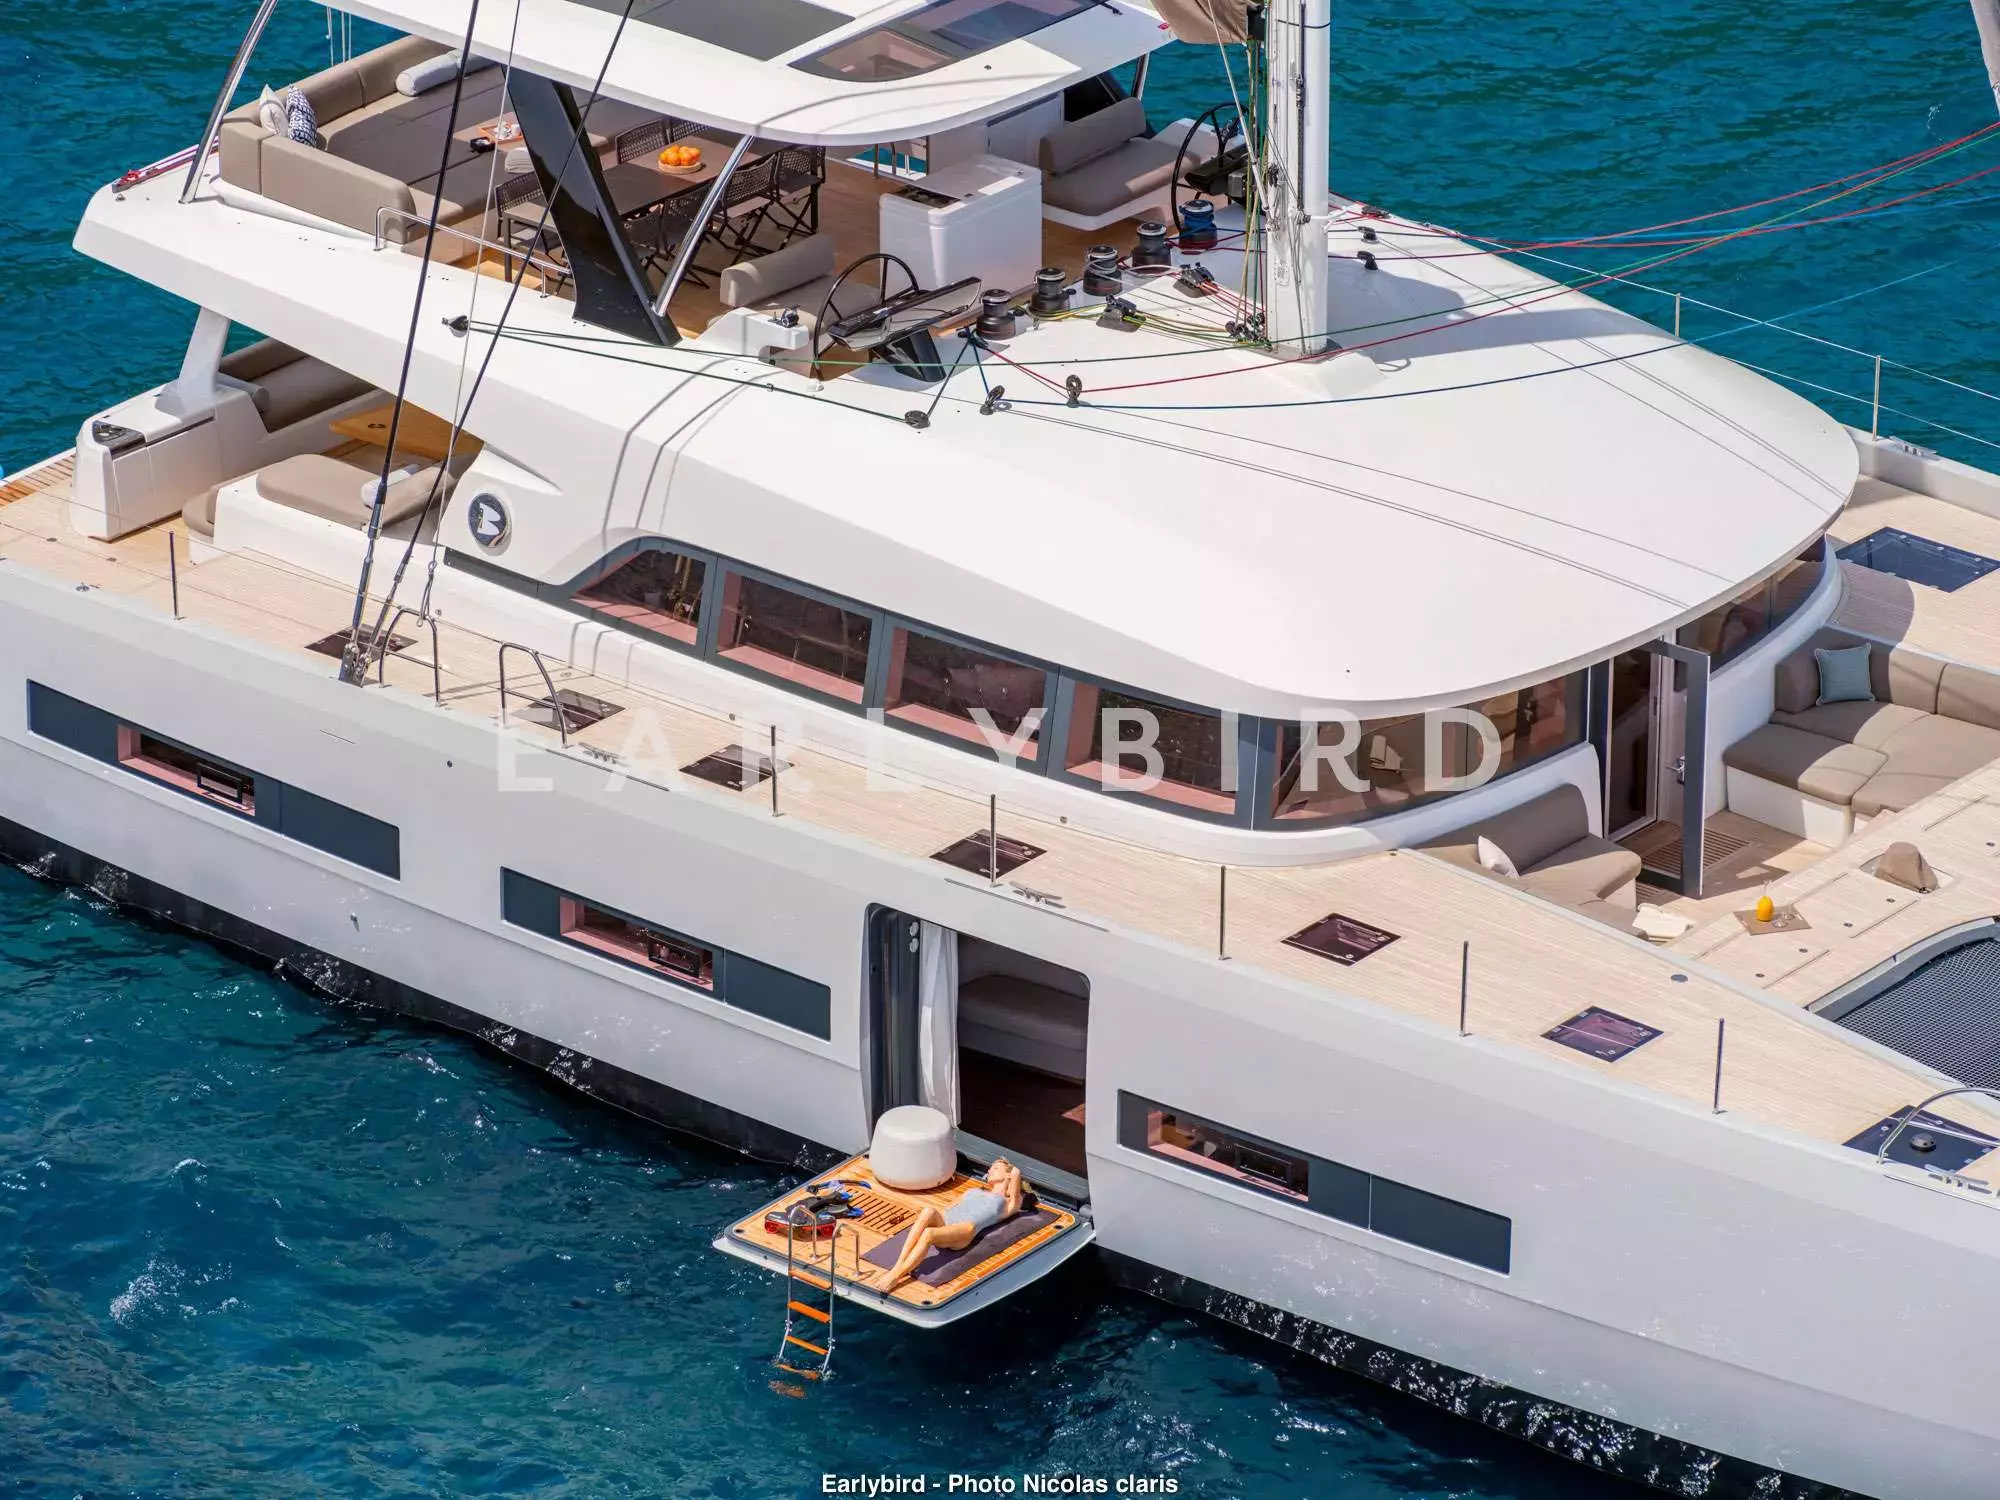 Earlybird by Lagoon - Special Offer for a private Luxury Catamaran Charter in Simpson Bay with a crew